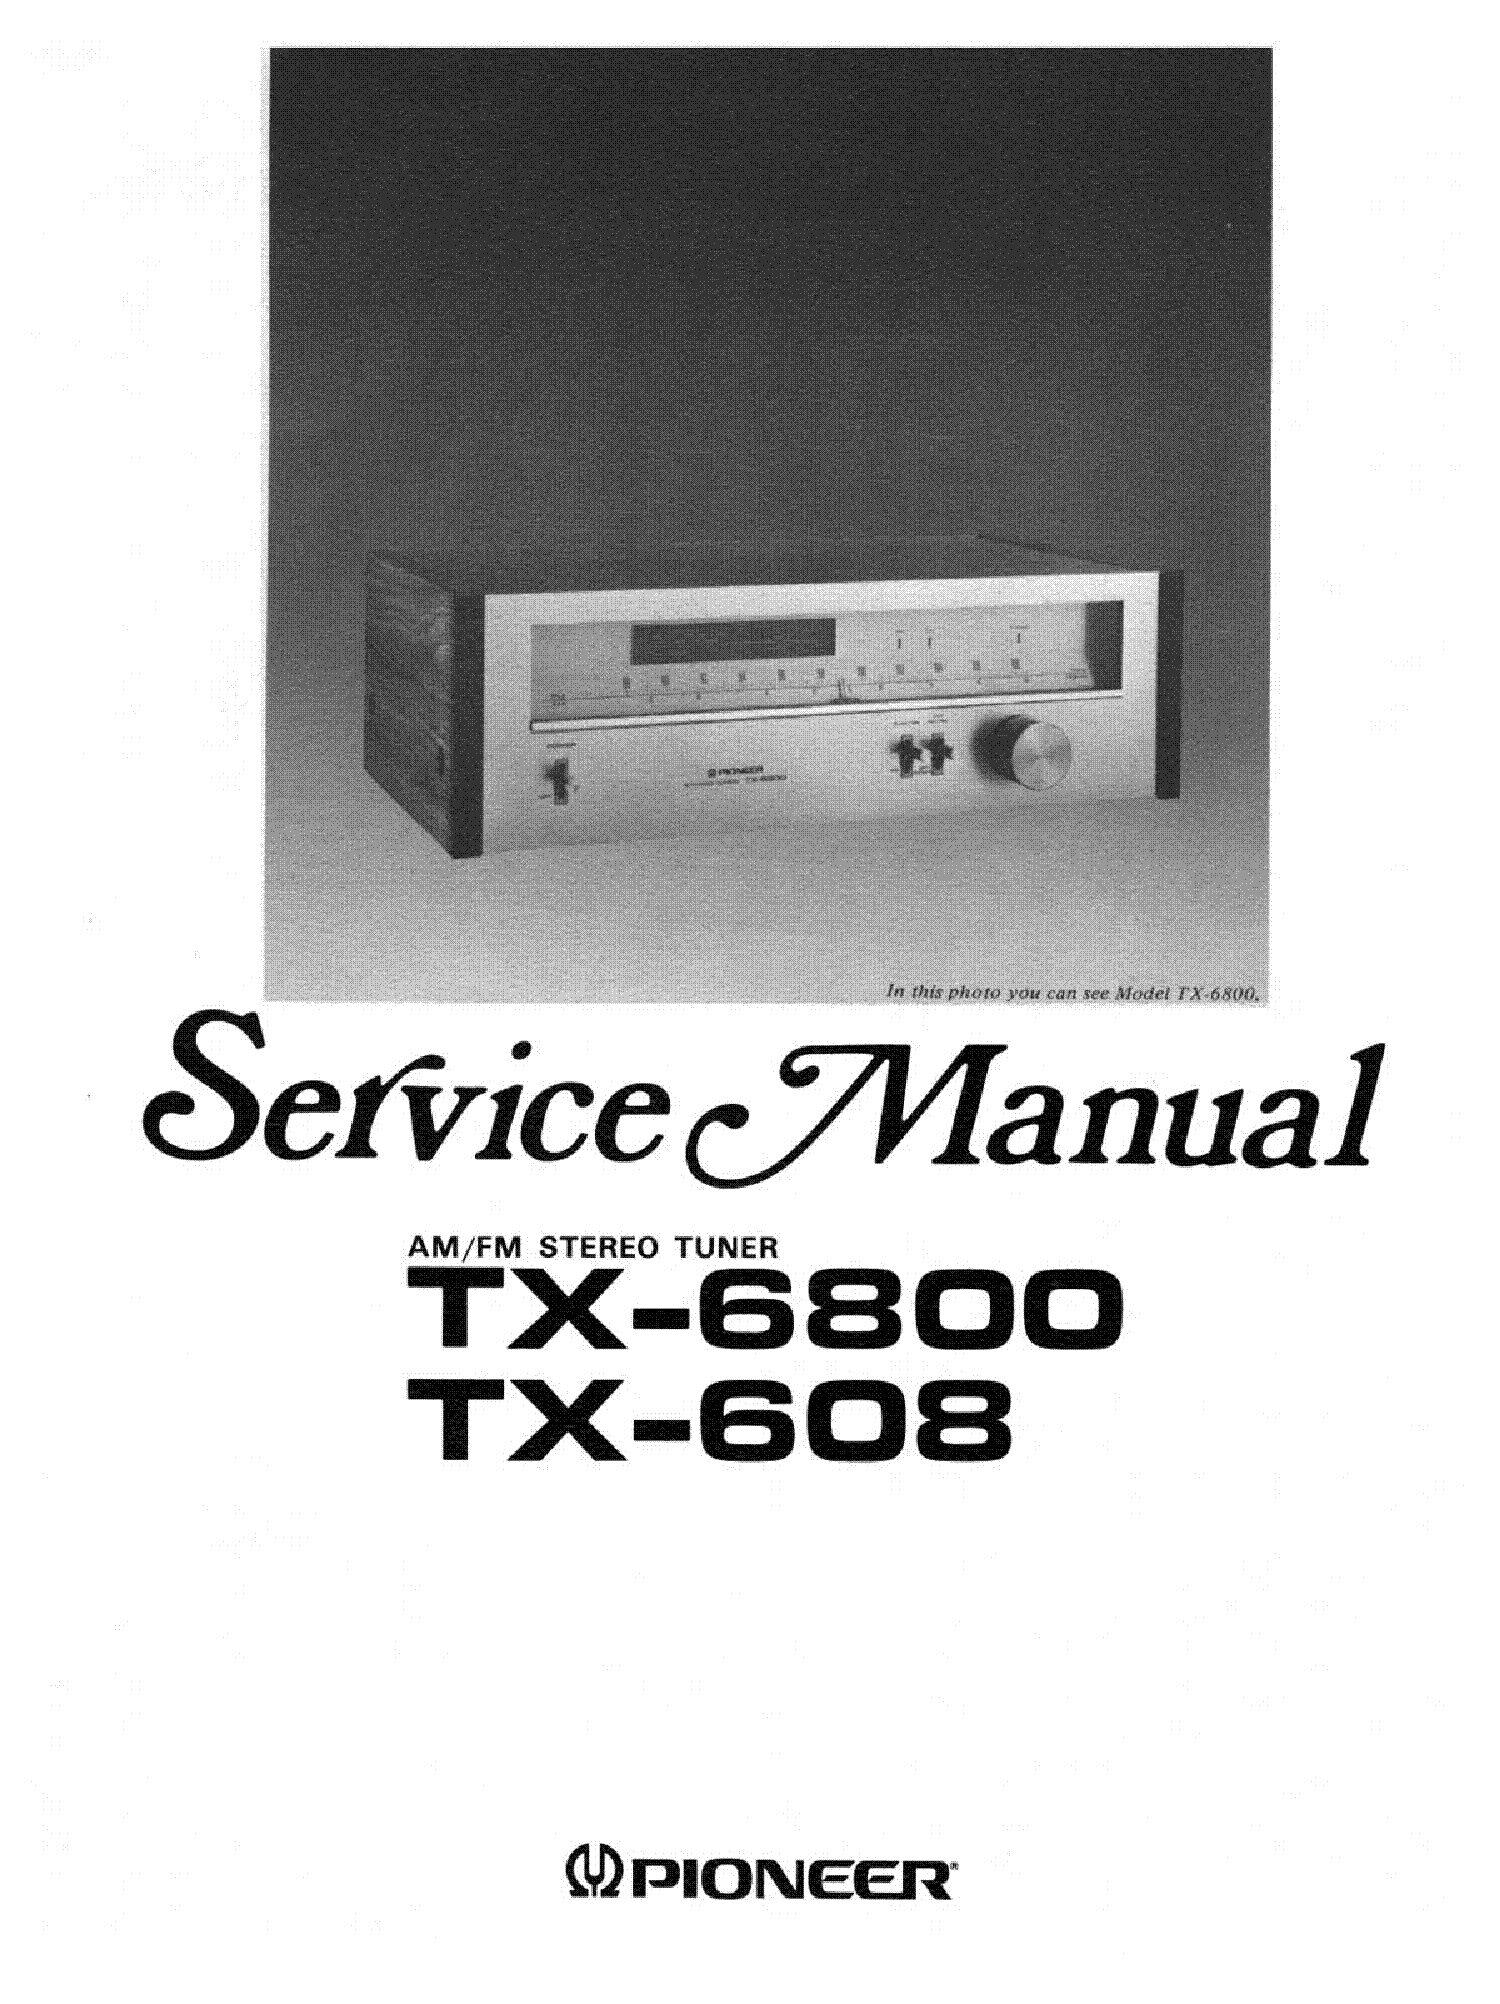 PIONEER TX-608 TX-6800 service manual (1st page)